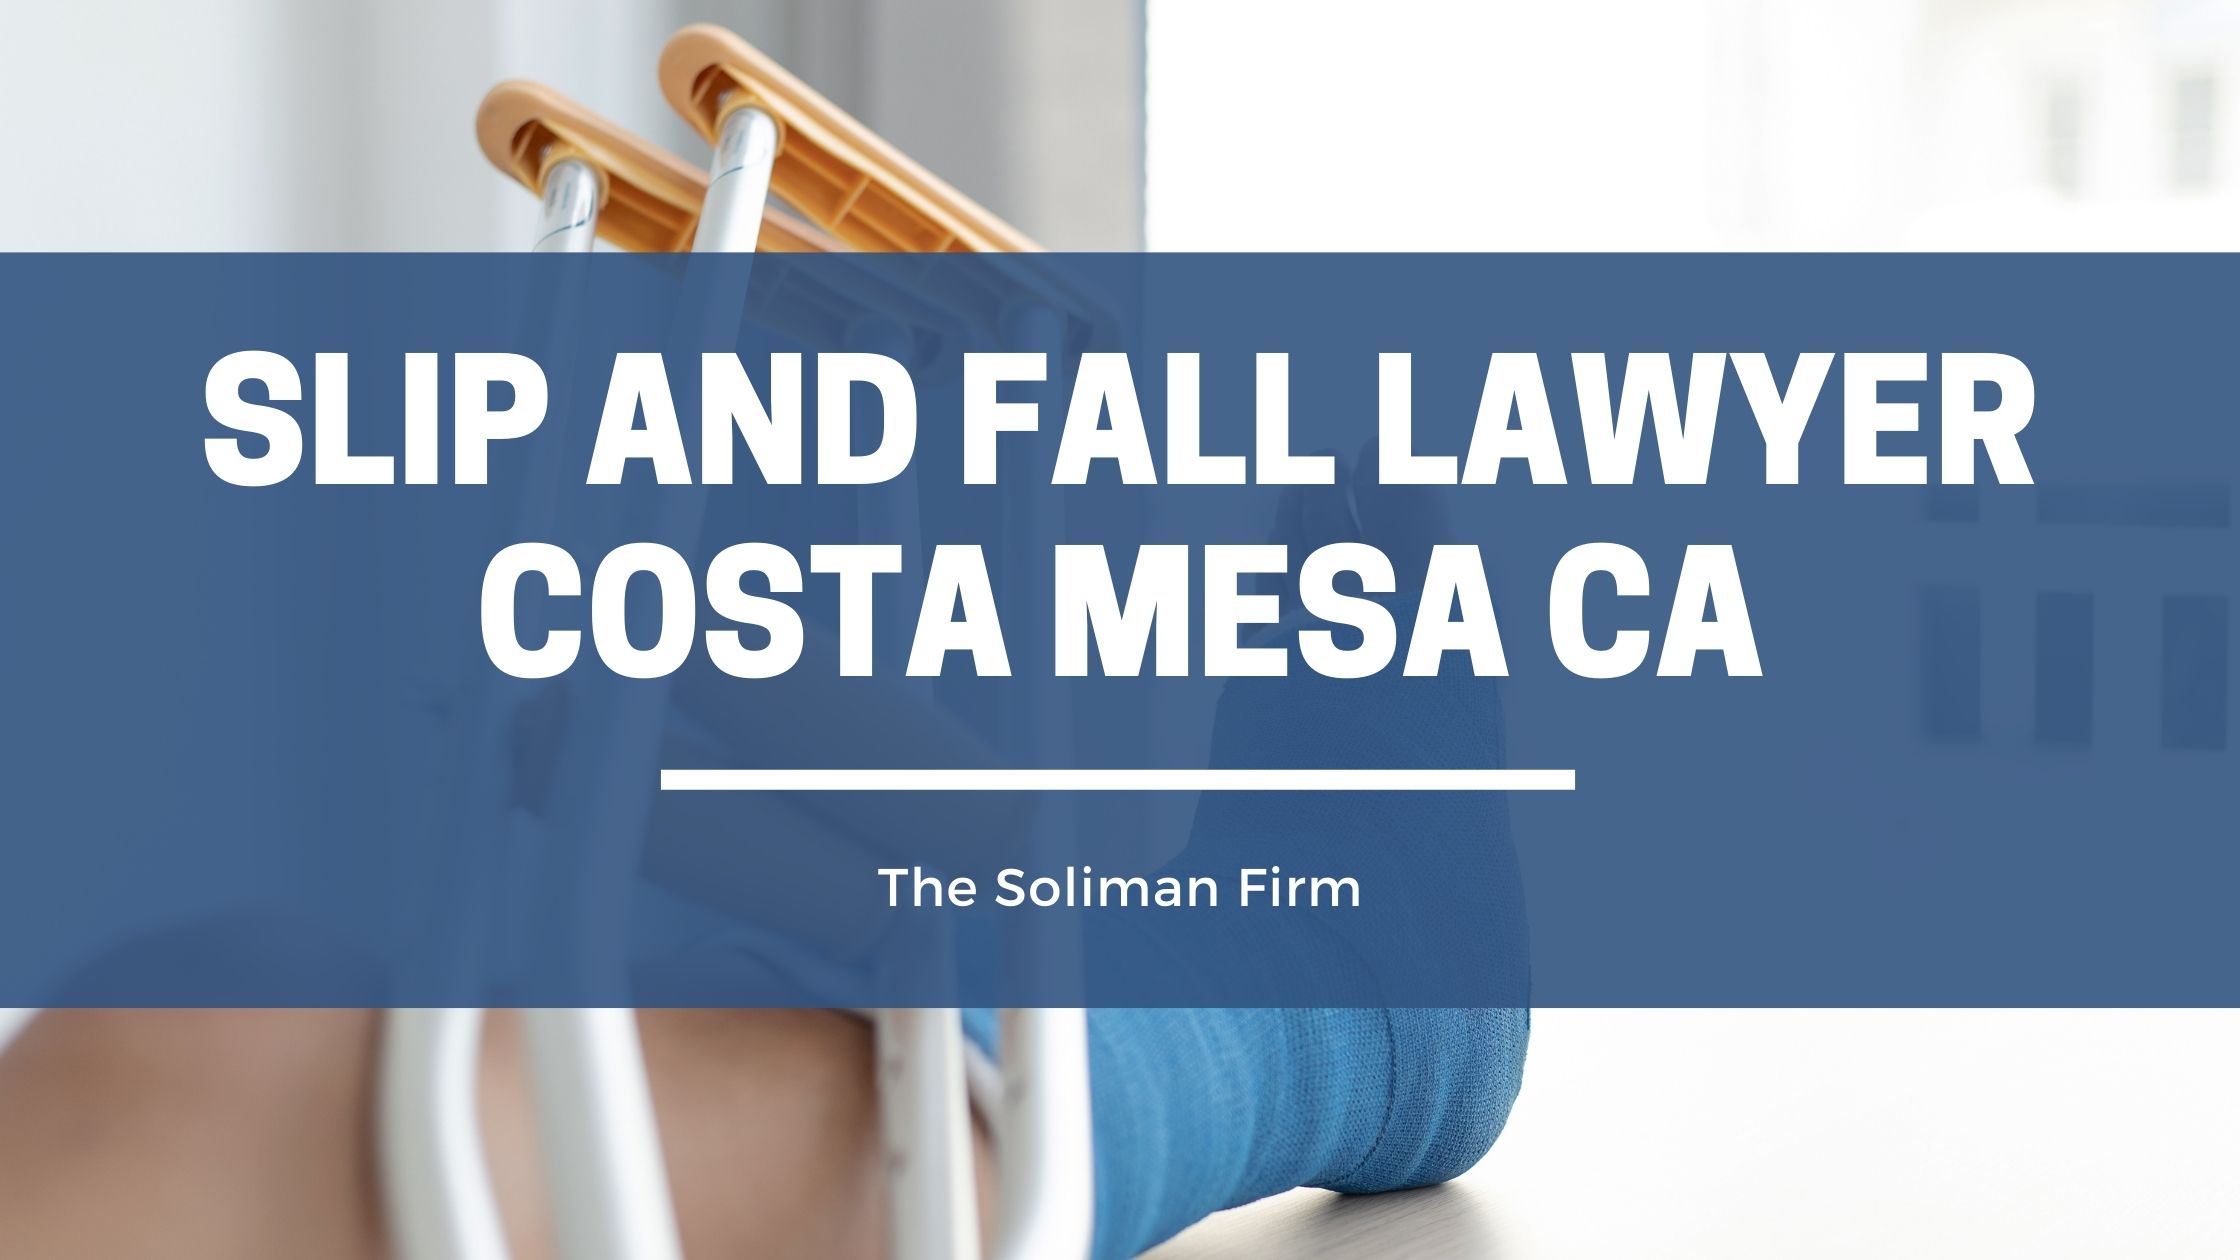 Slip and Fall Lawyer Costa Mesa CA